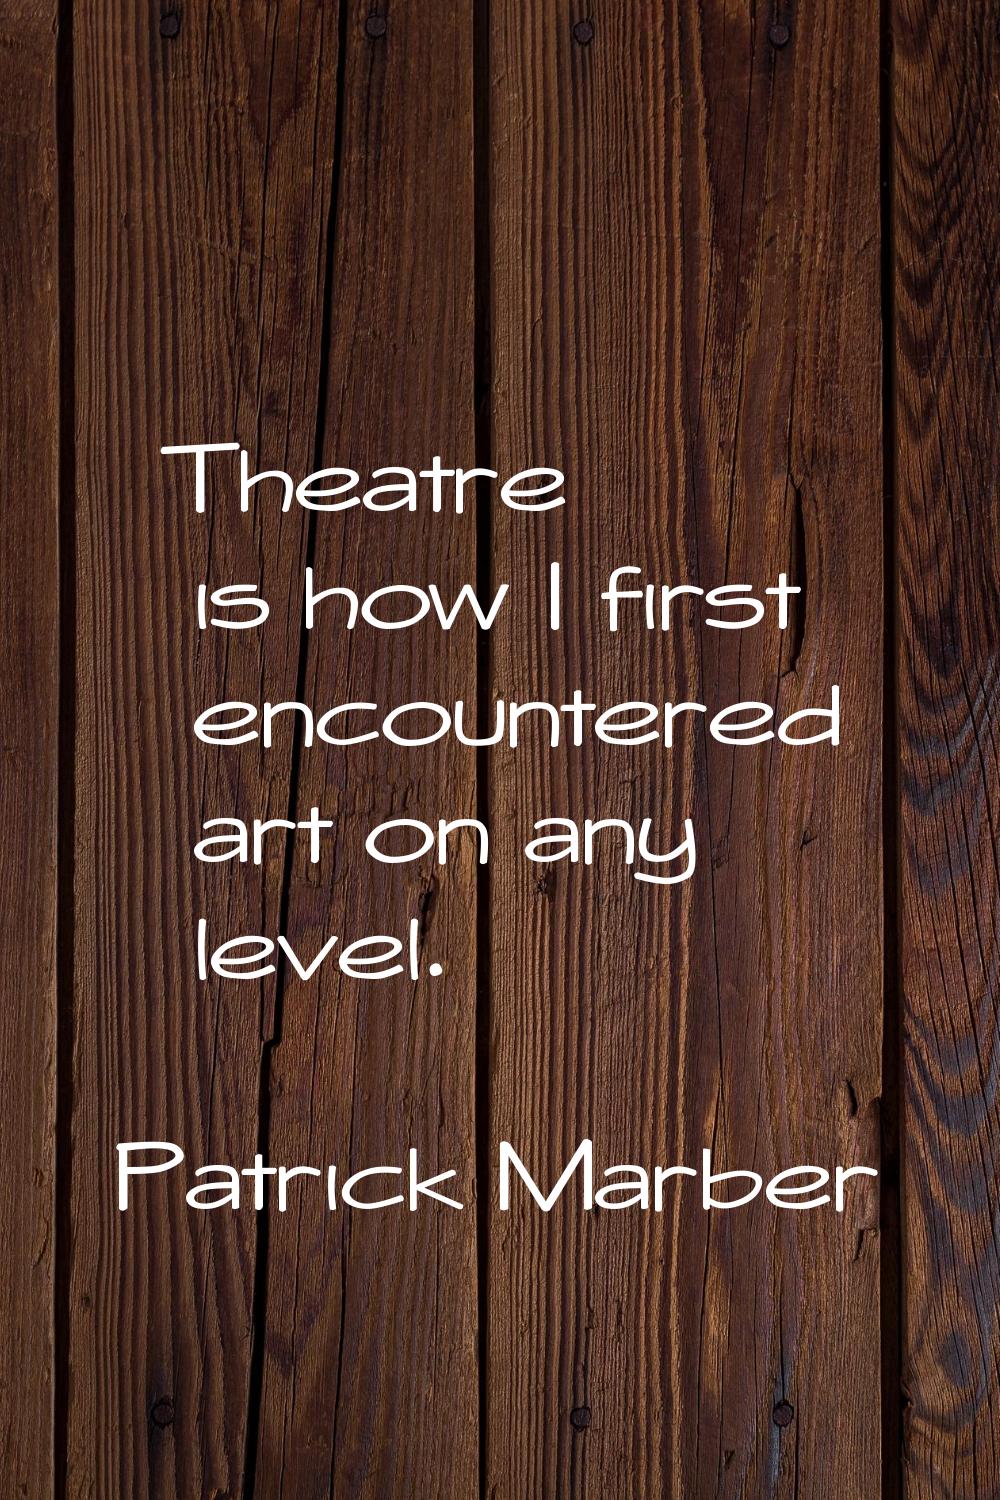 Theatre is how I first encountered art on any level.